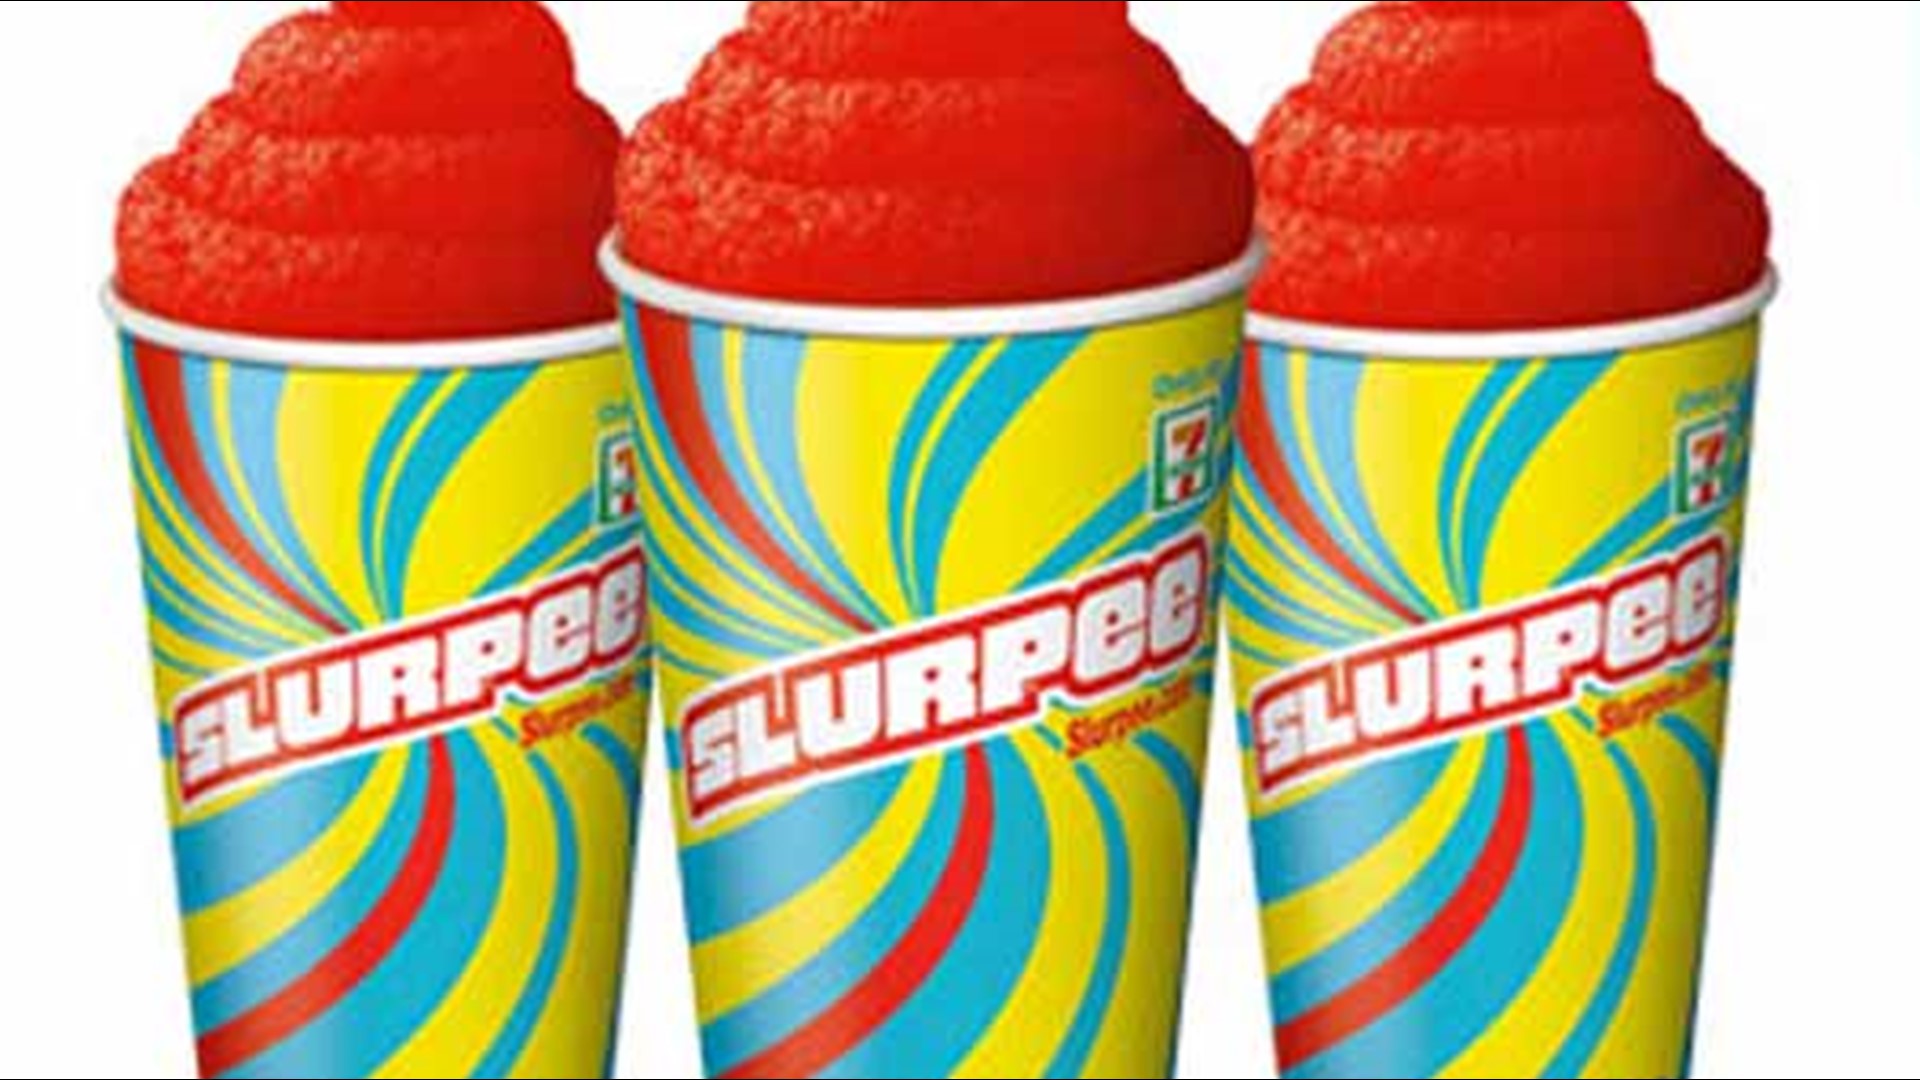 Get your free Slurpee today at 7Eleven